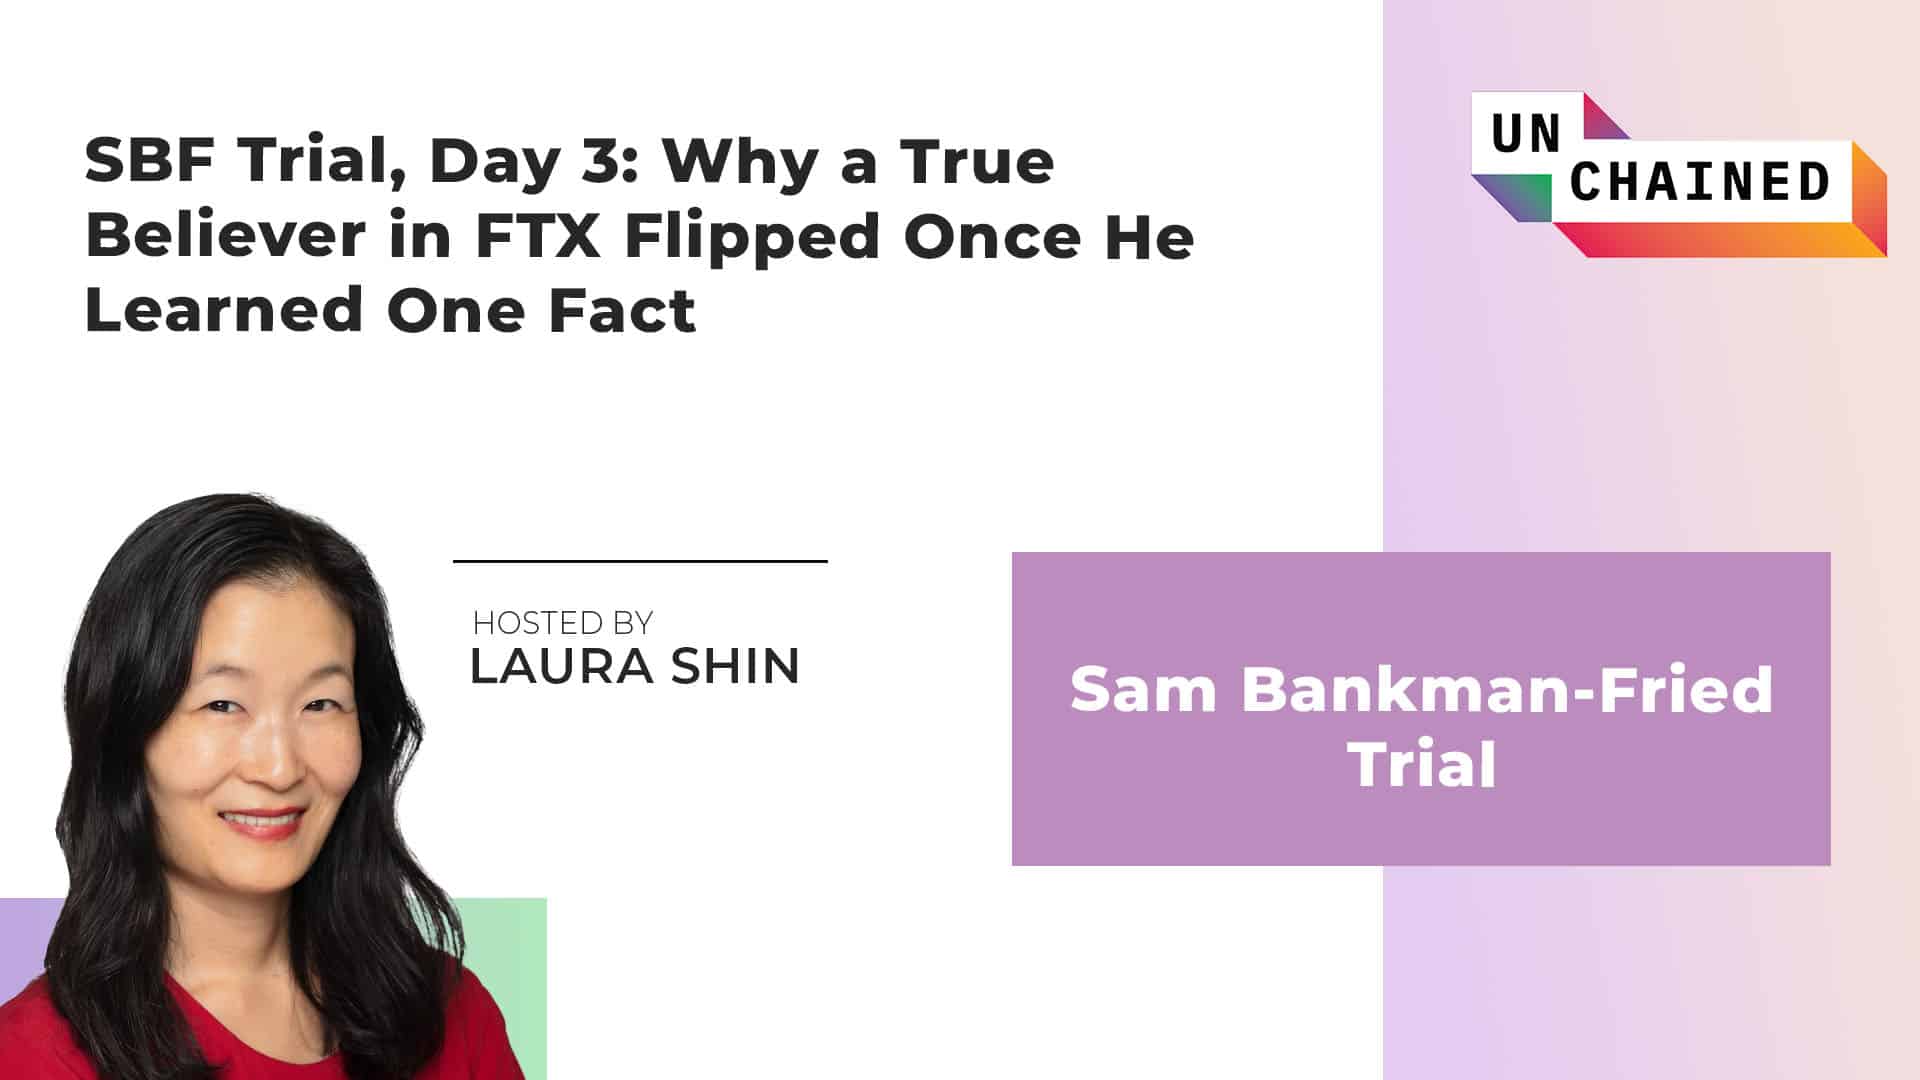 SBF Trial, Day 3: Why a True Believer in FTX Flipped Once He Learned One Fact